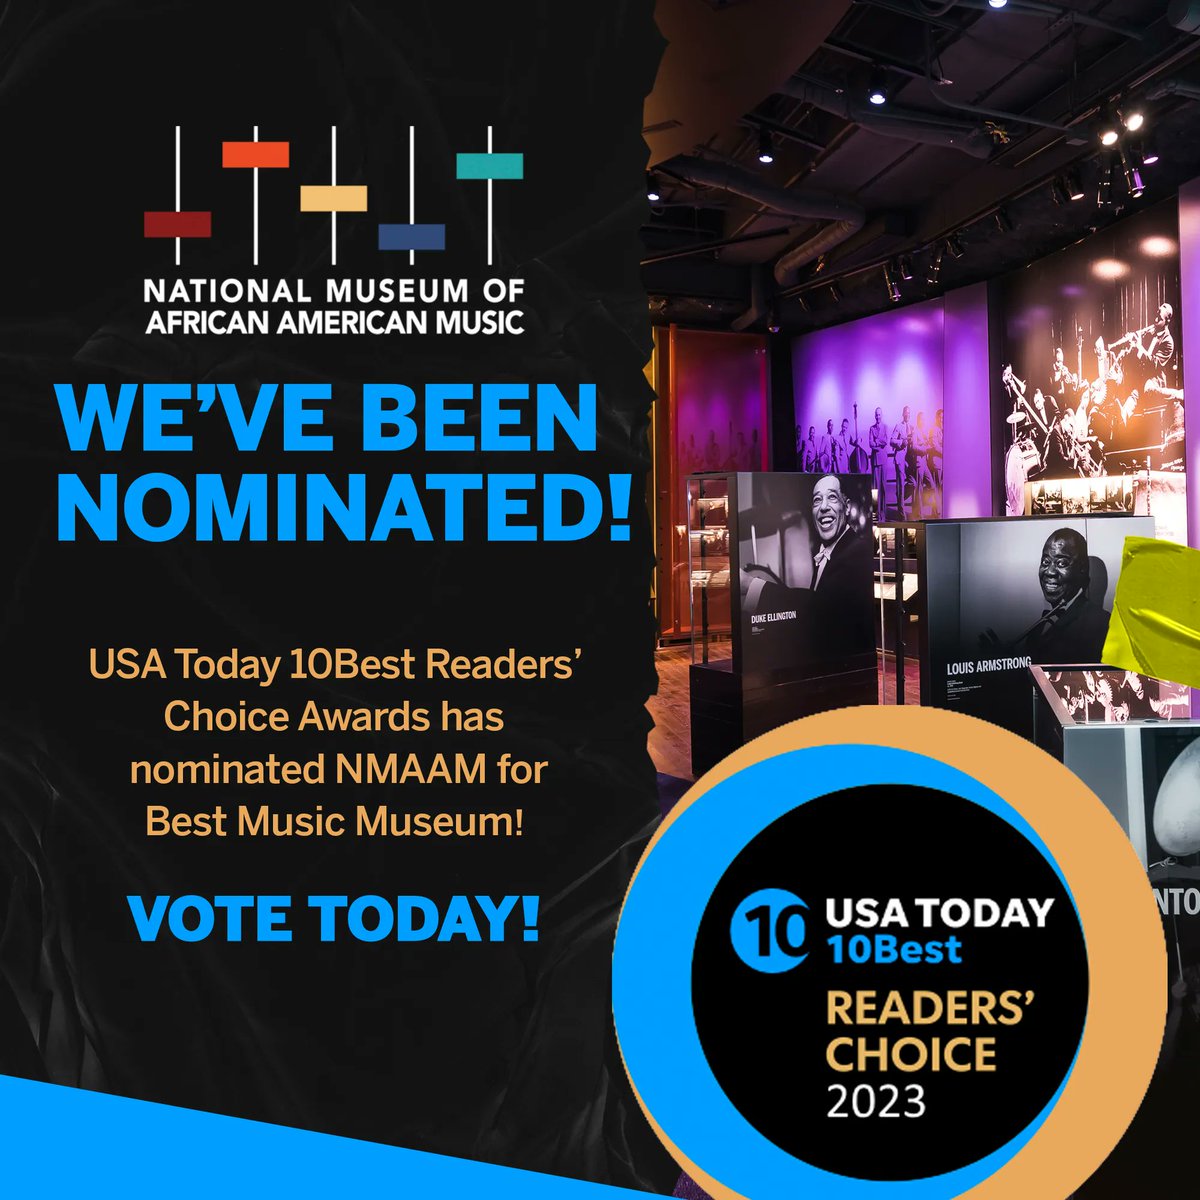 Guess what? We’ve been nominated for BEST MUSIC MUSEUM! 🙌🏾 Vote today at buff.ly/3HDq8wI You can vote once per day until Monday, February 13 at noon ET. #NMAAM #WhereLegendsLiveForever